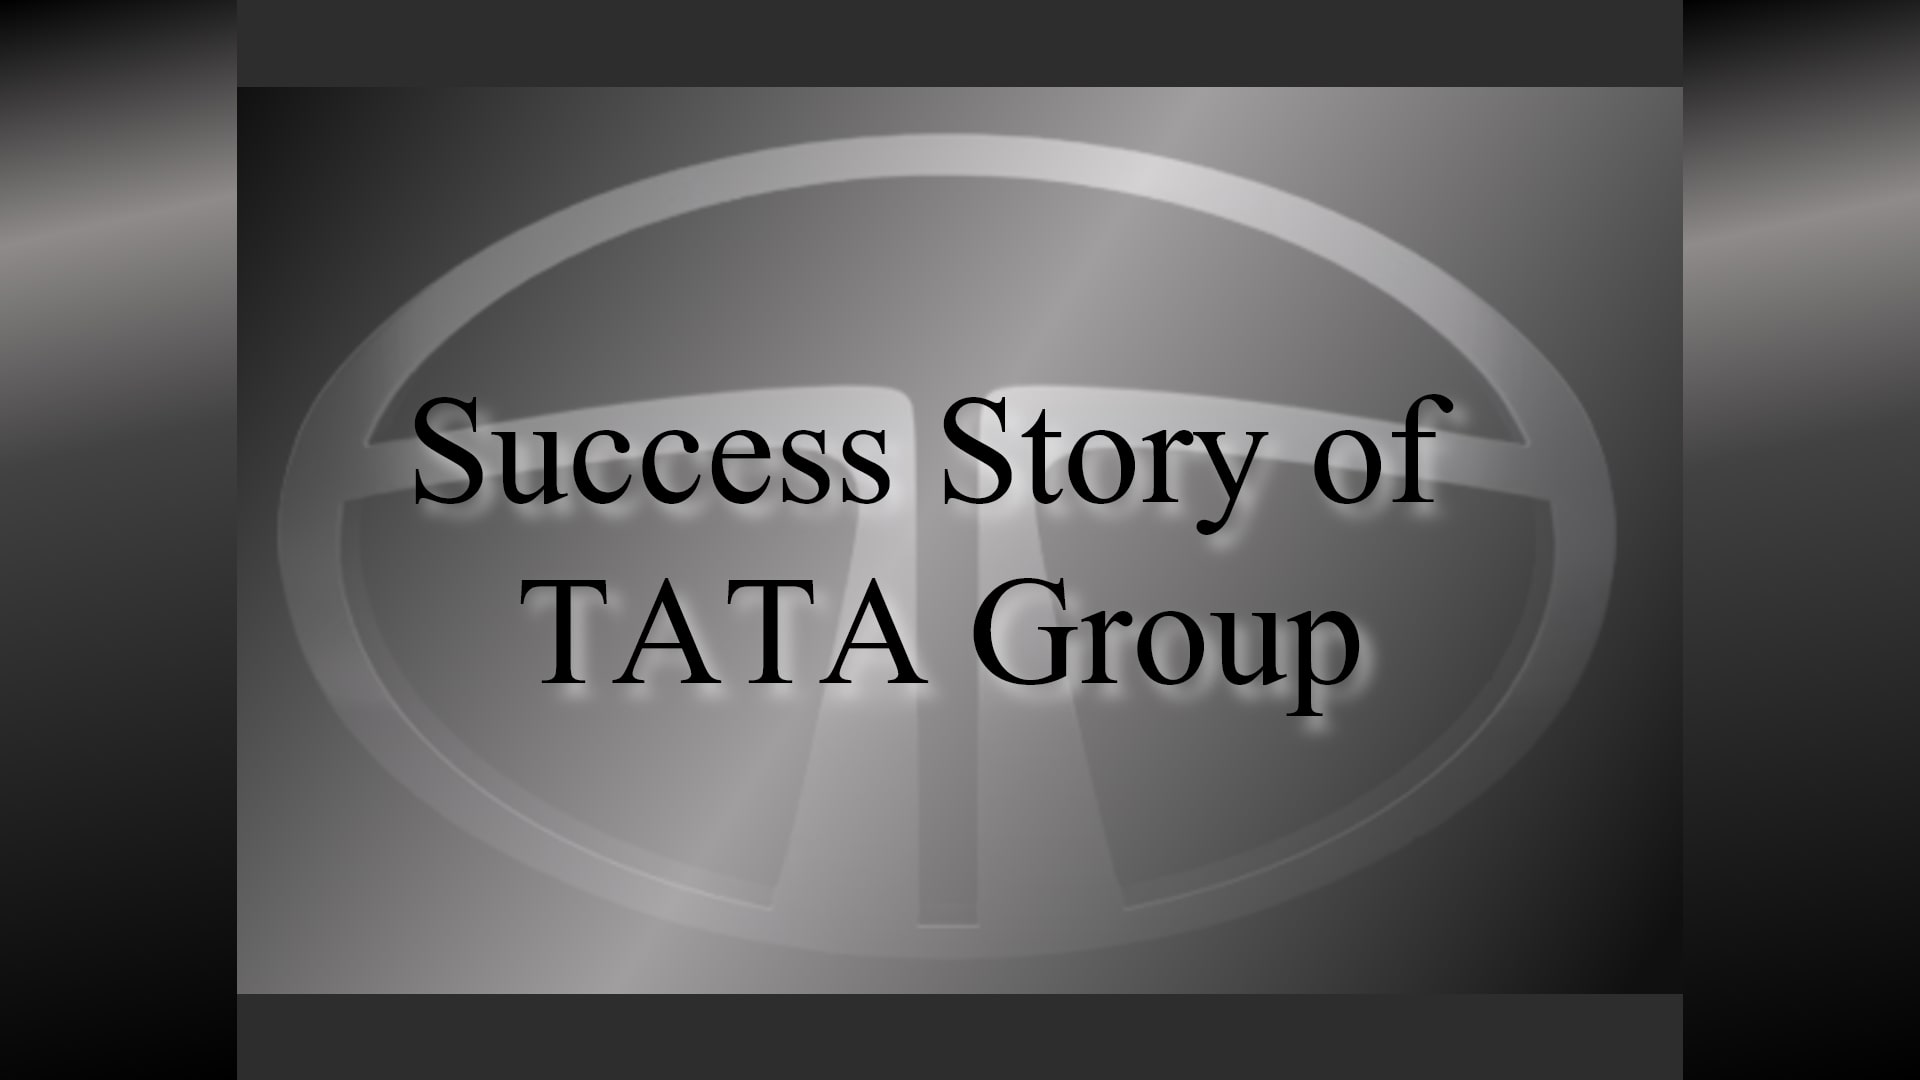 The Tata Group Success Story